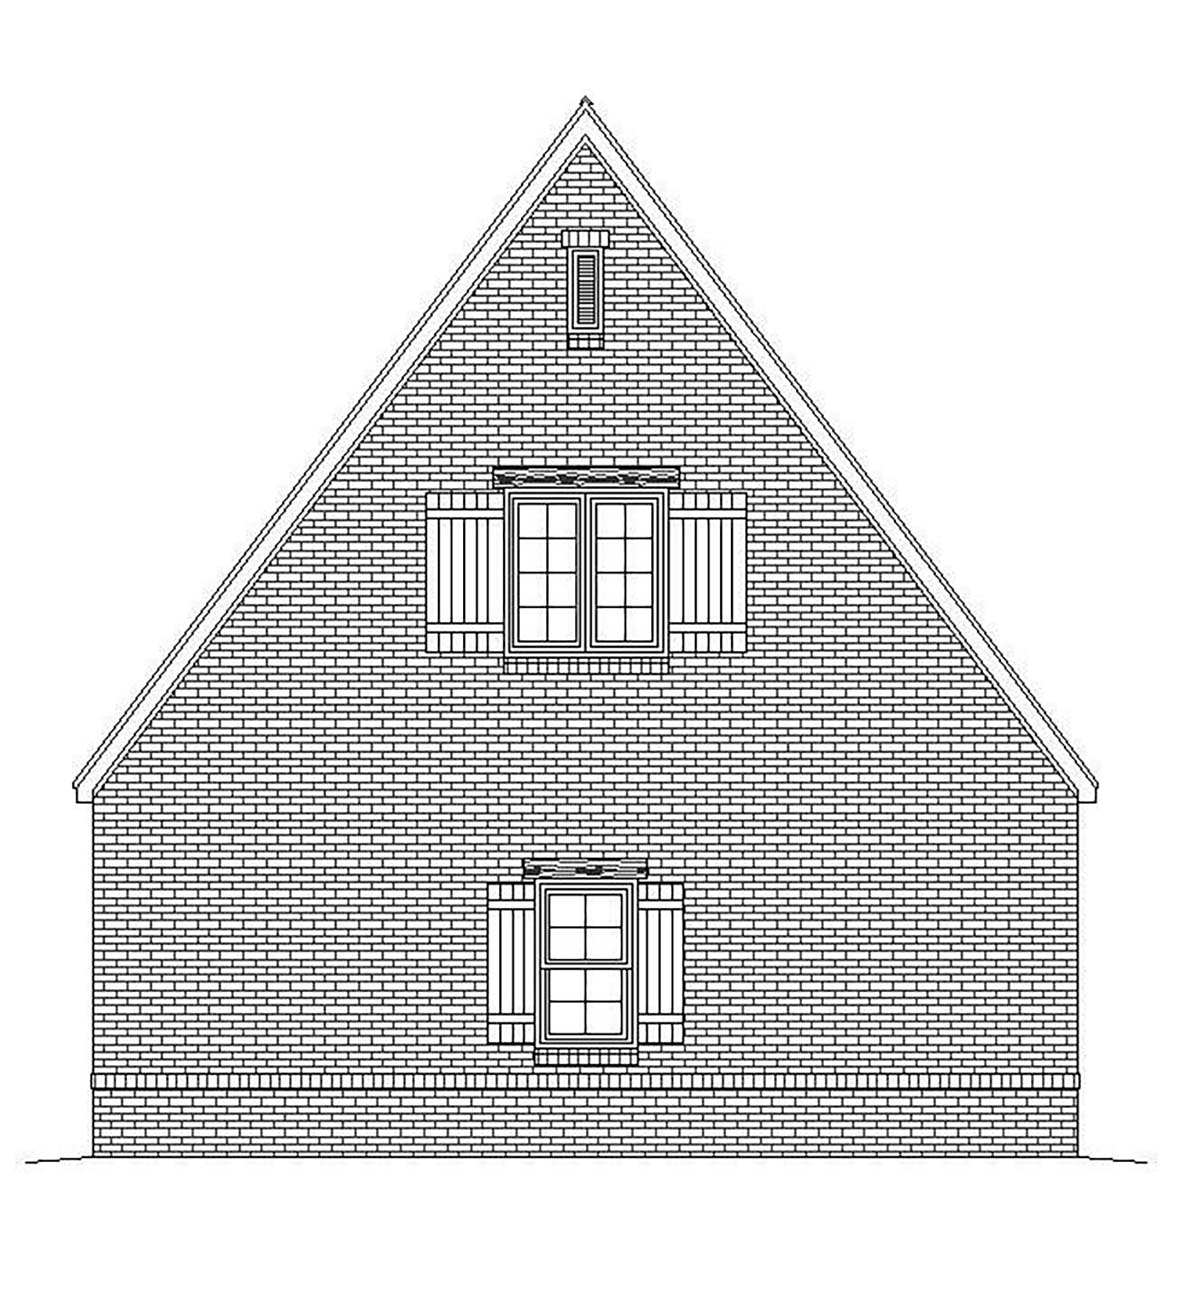 European, French Country, Traditional 2 Car Garage Plan 51684 Rear Elevation